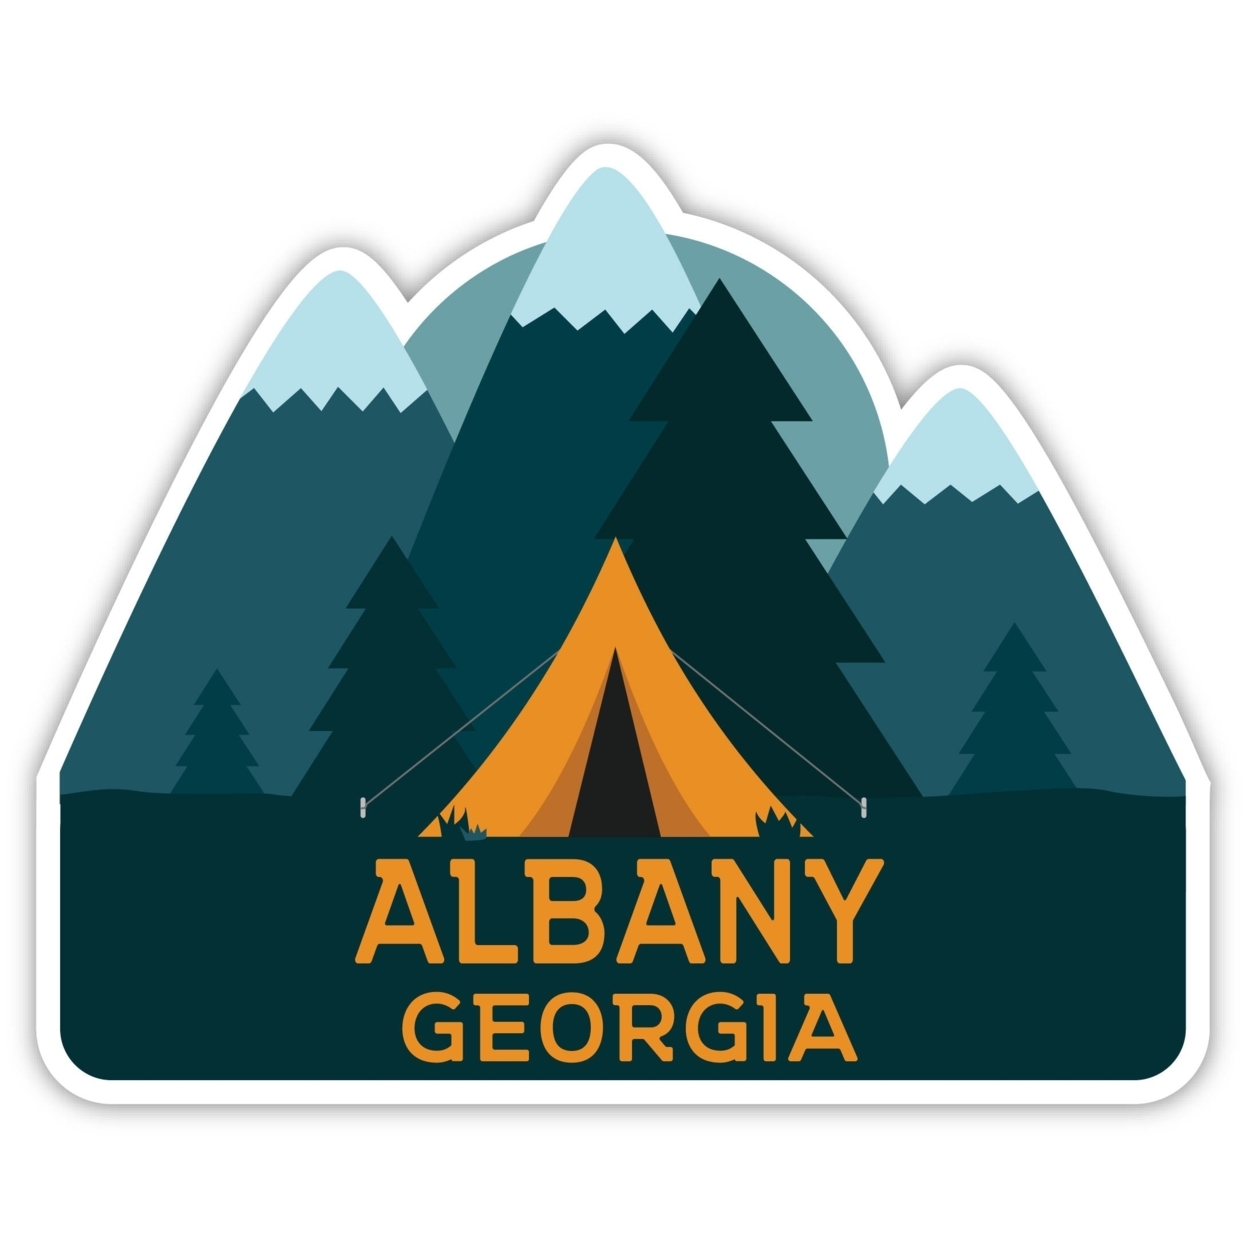 Albany Georgia Souvenir Decorative Stickers (Choose Theme And Size) - 4-Pack, 12-Inch, Bear